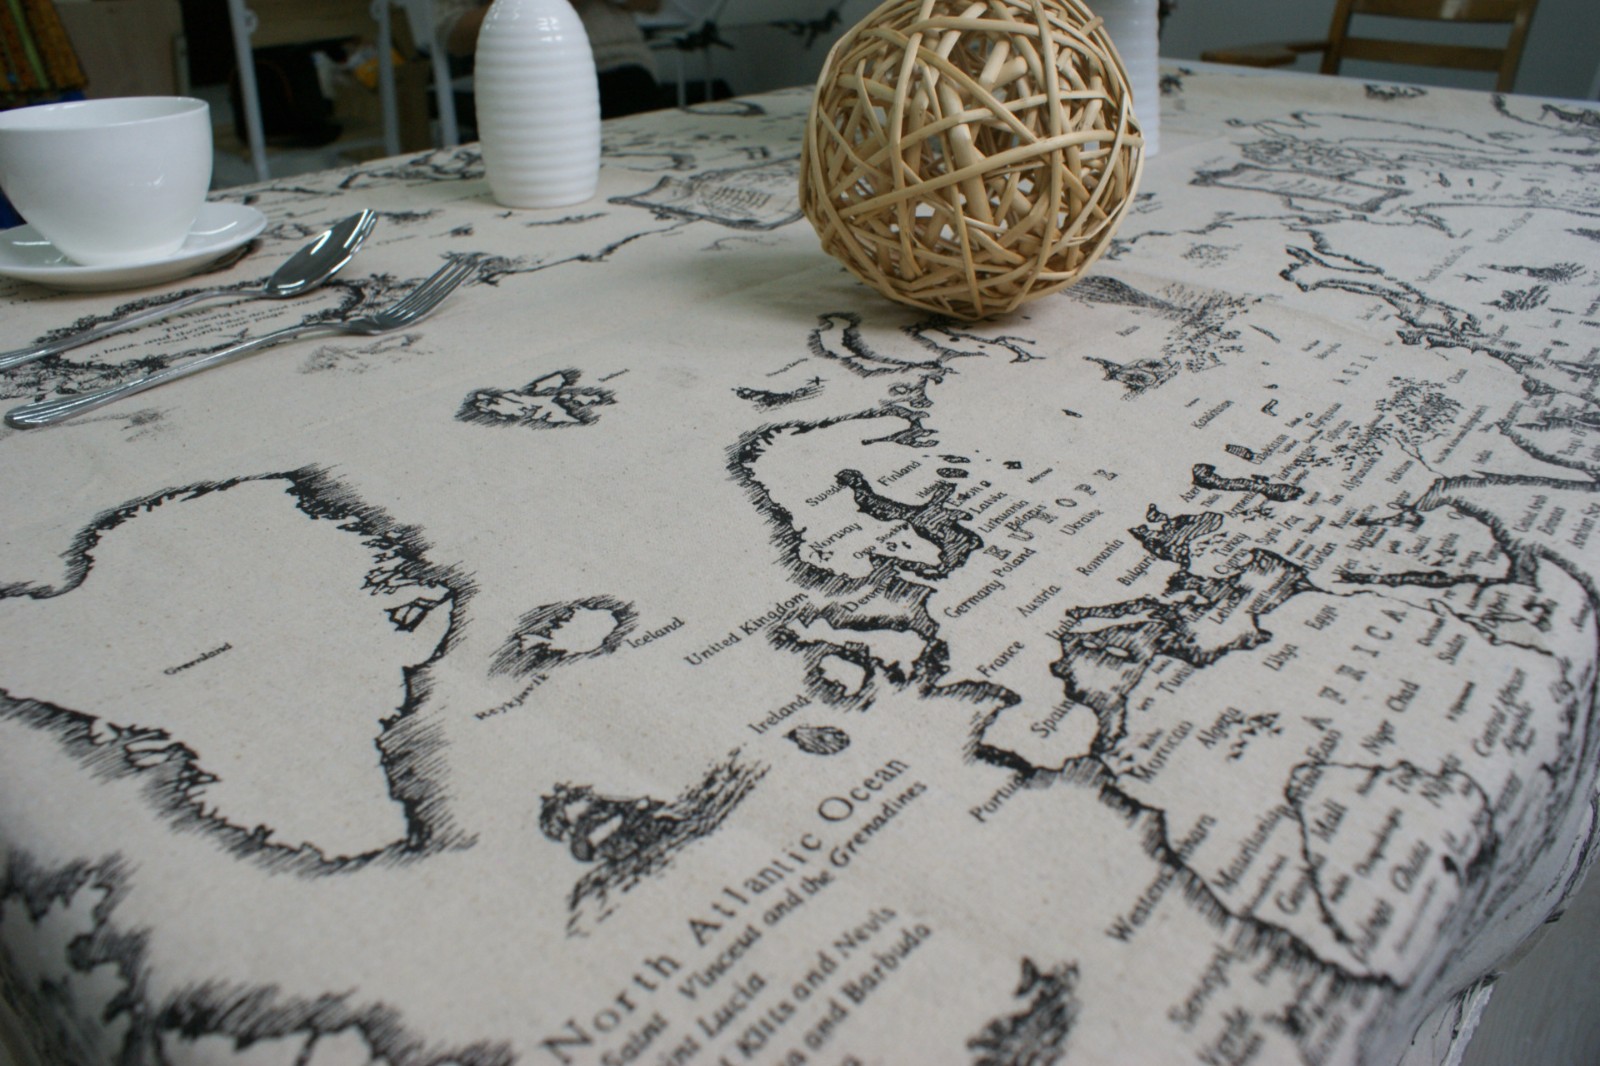 World-Map-Tablecloth-High-Quality-Lace-Tablecloth-Decorative-Elegant-Tablecloth-Linen-Table-Cover-1112130-5